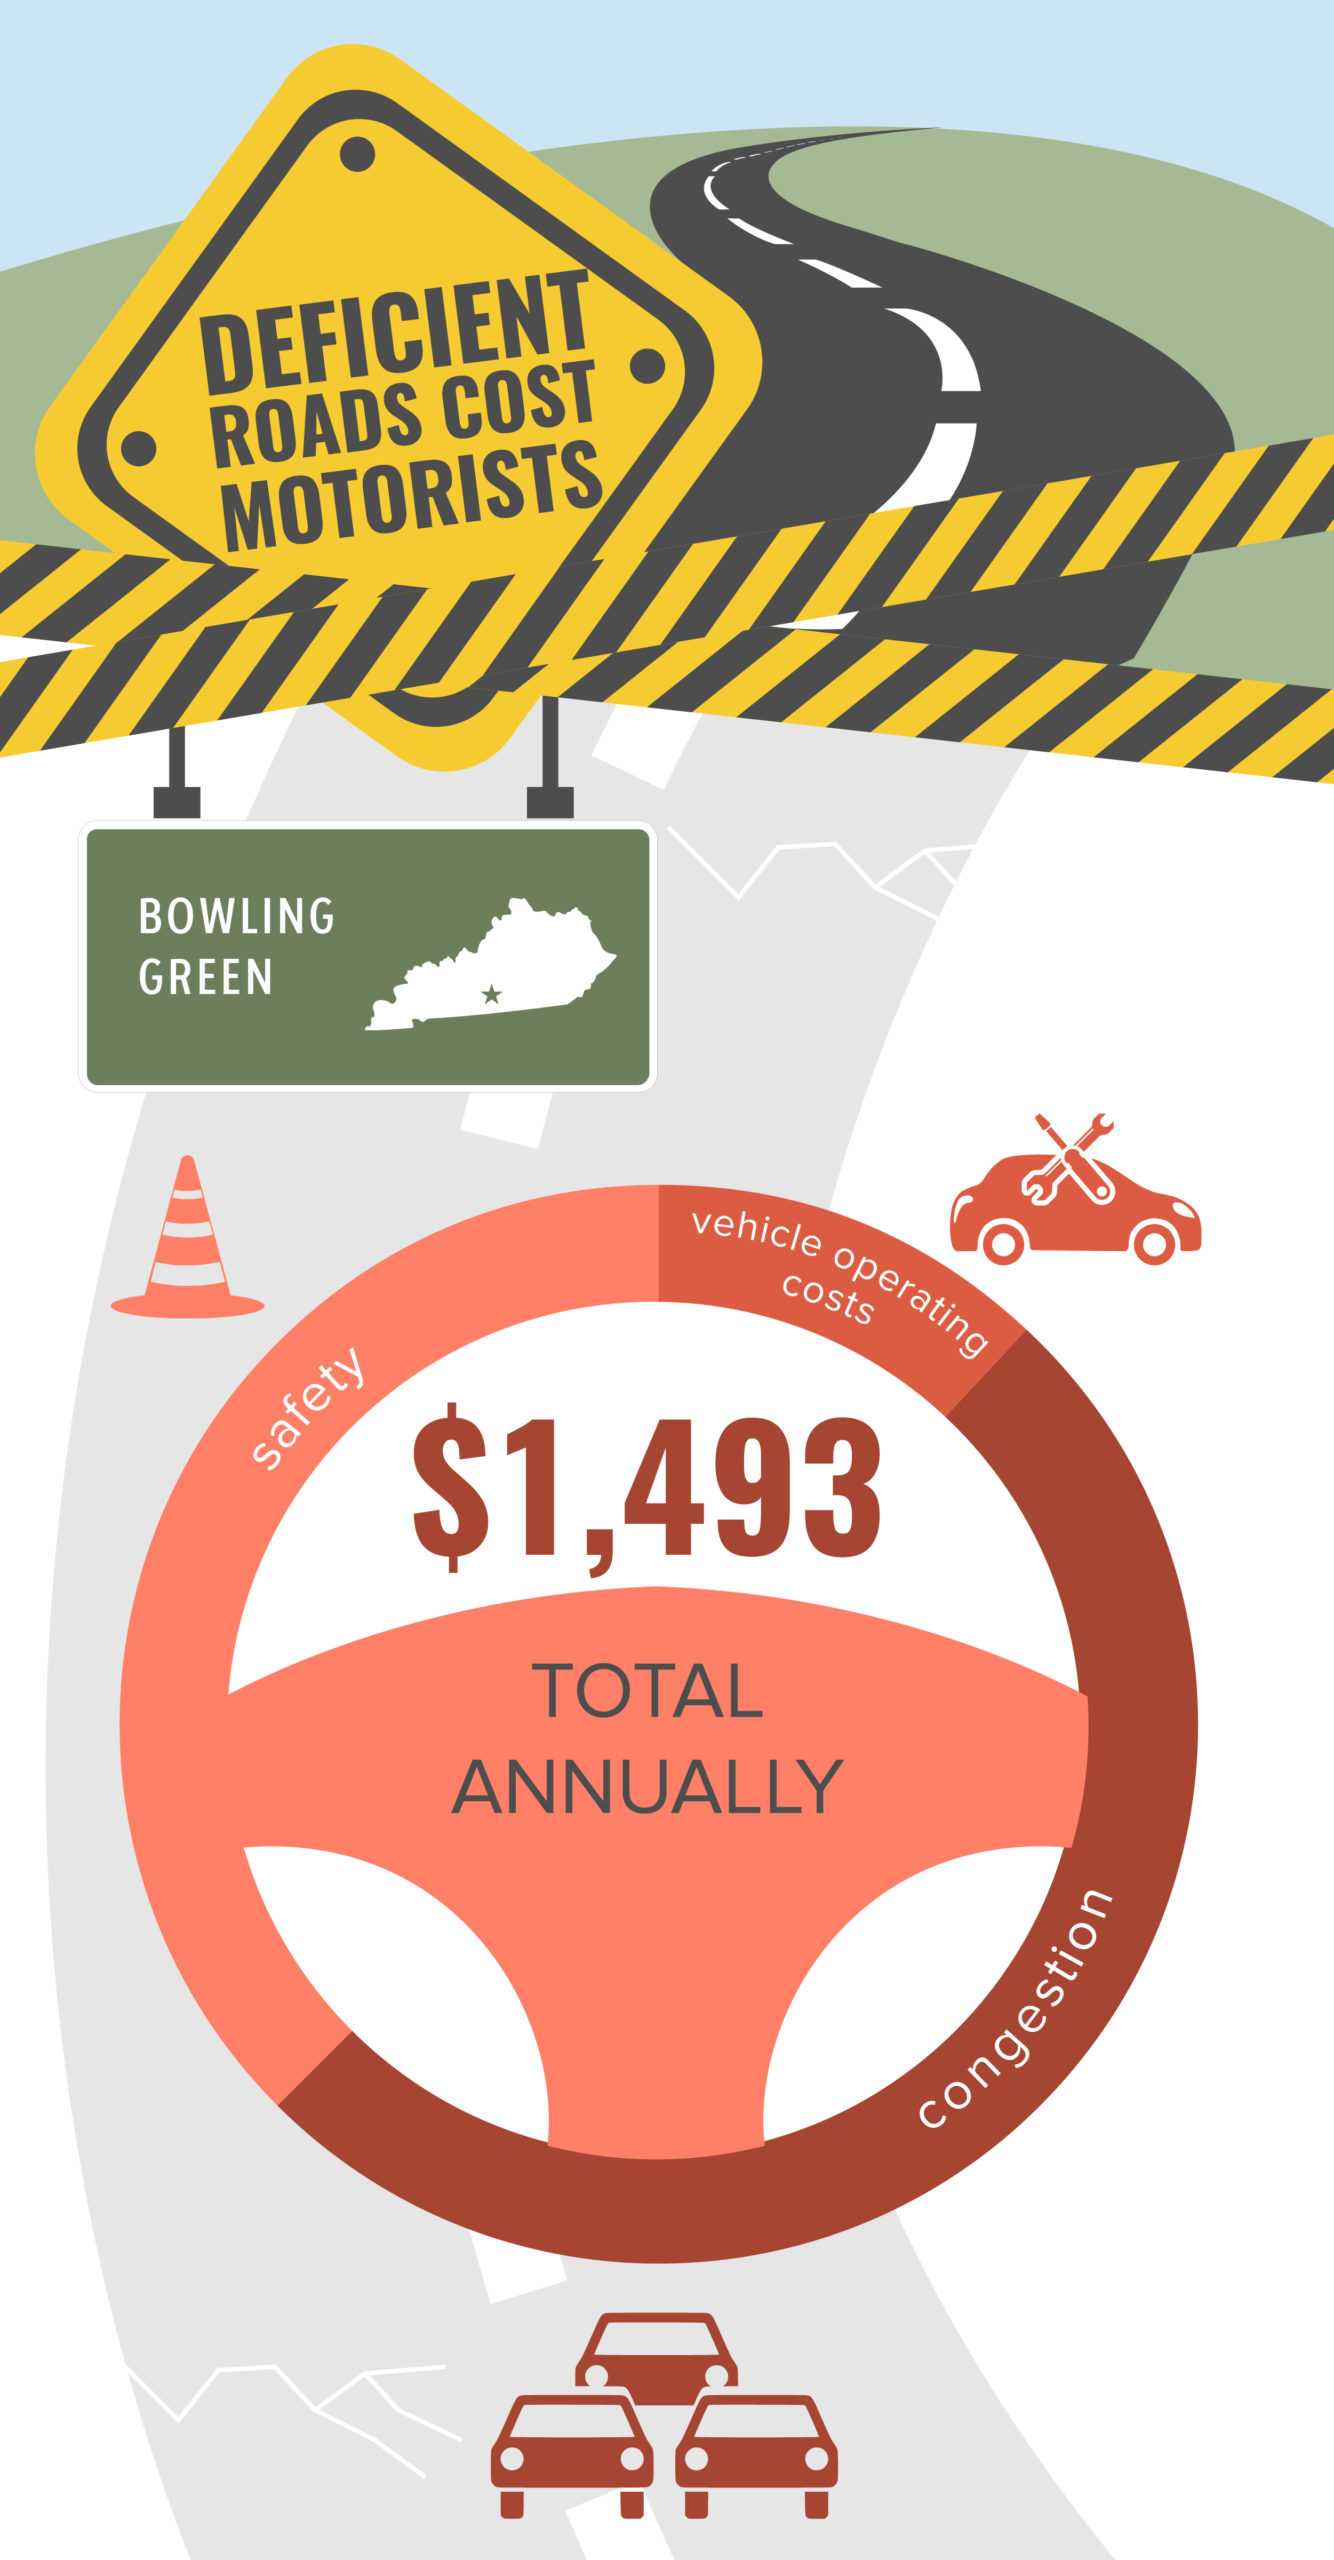 Bowling Green Deficient Roads Infographic – March 2020